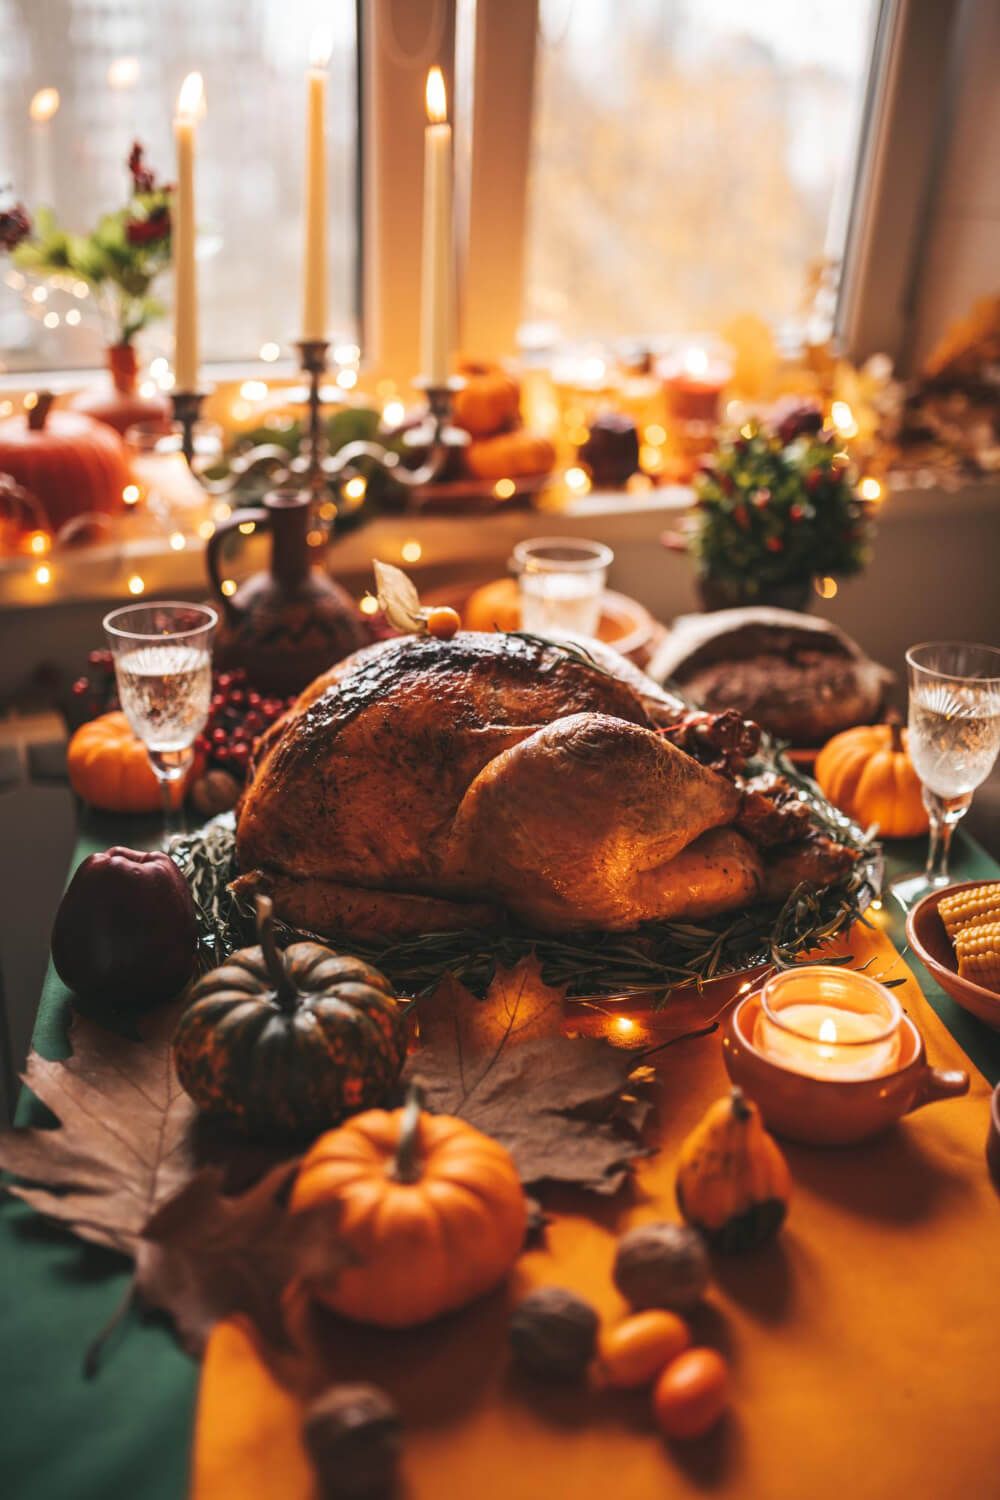 A festive Thanksgiving table setting with candles, pumpkins, and a golden turkey centerpiece.